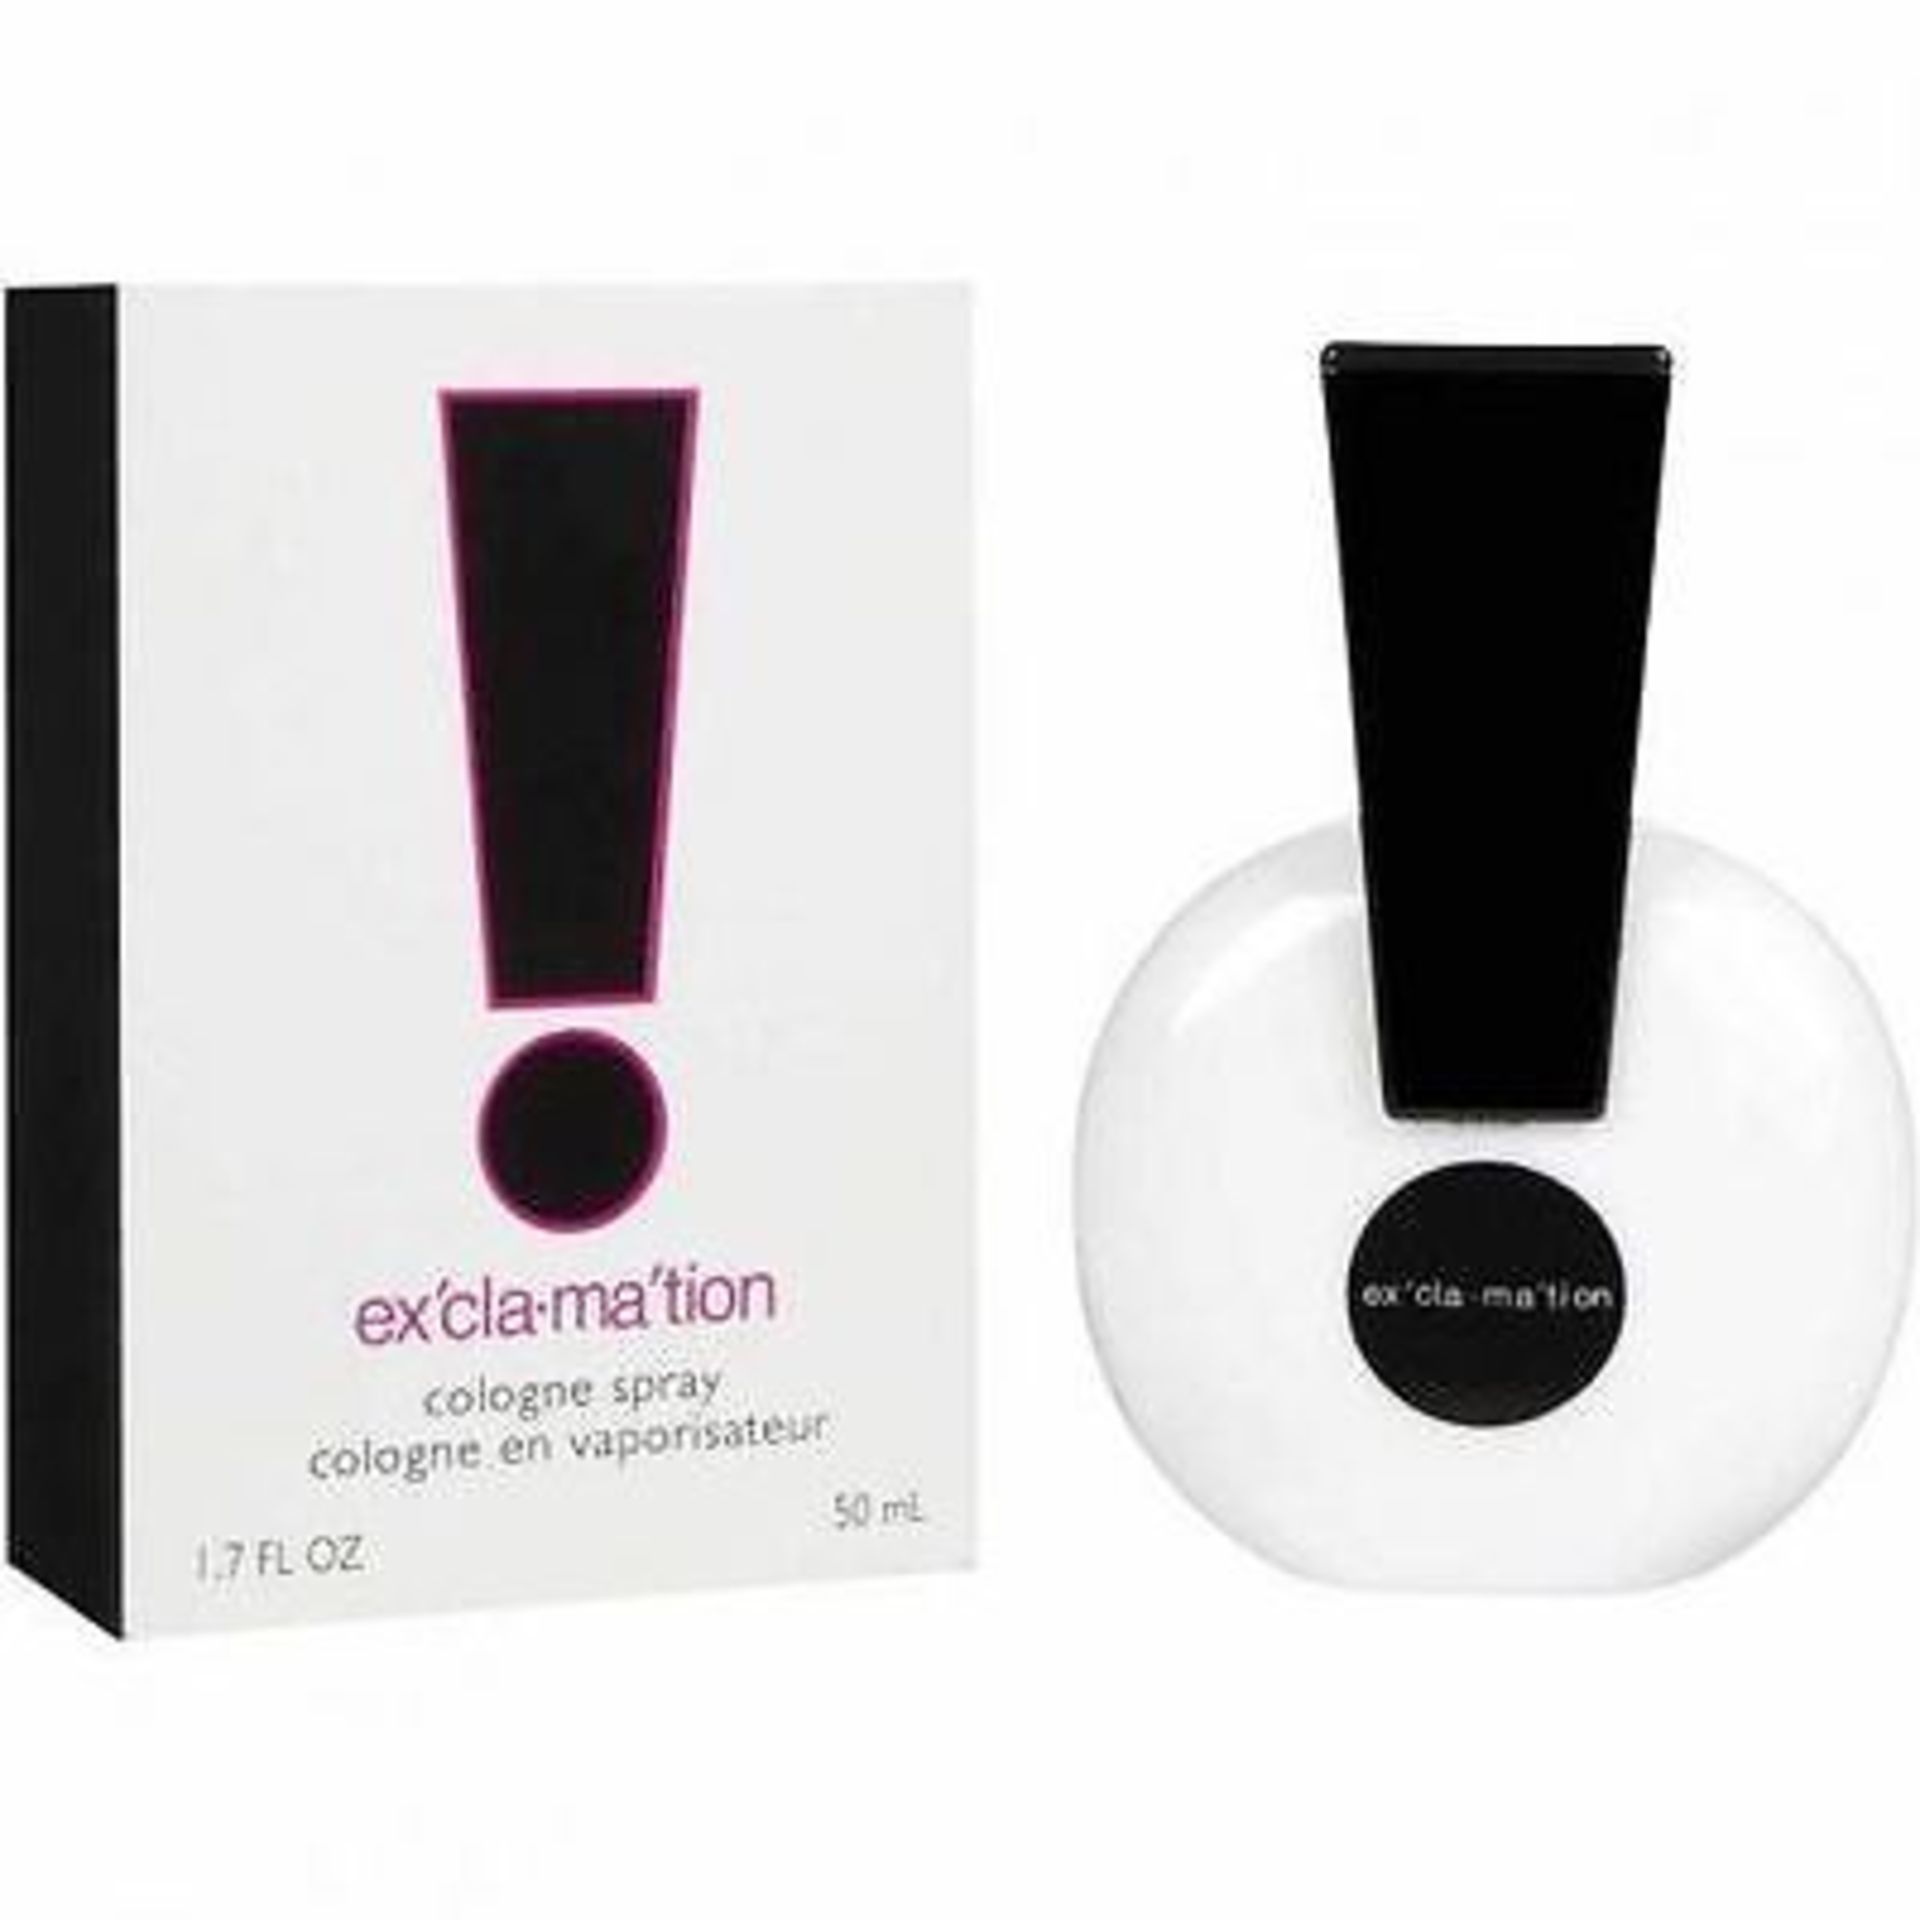 + VAT Brand New Coty Exclamation 50ml Cologne Spray